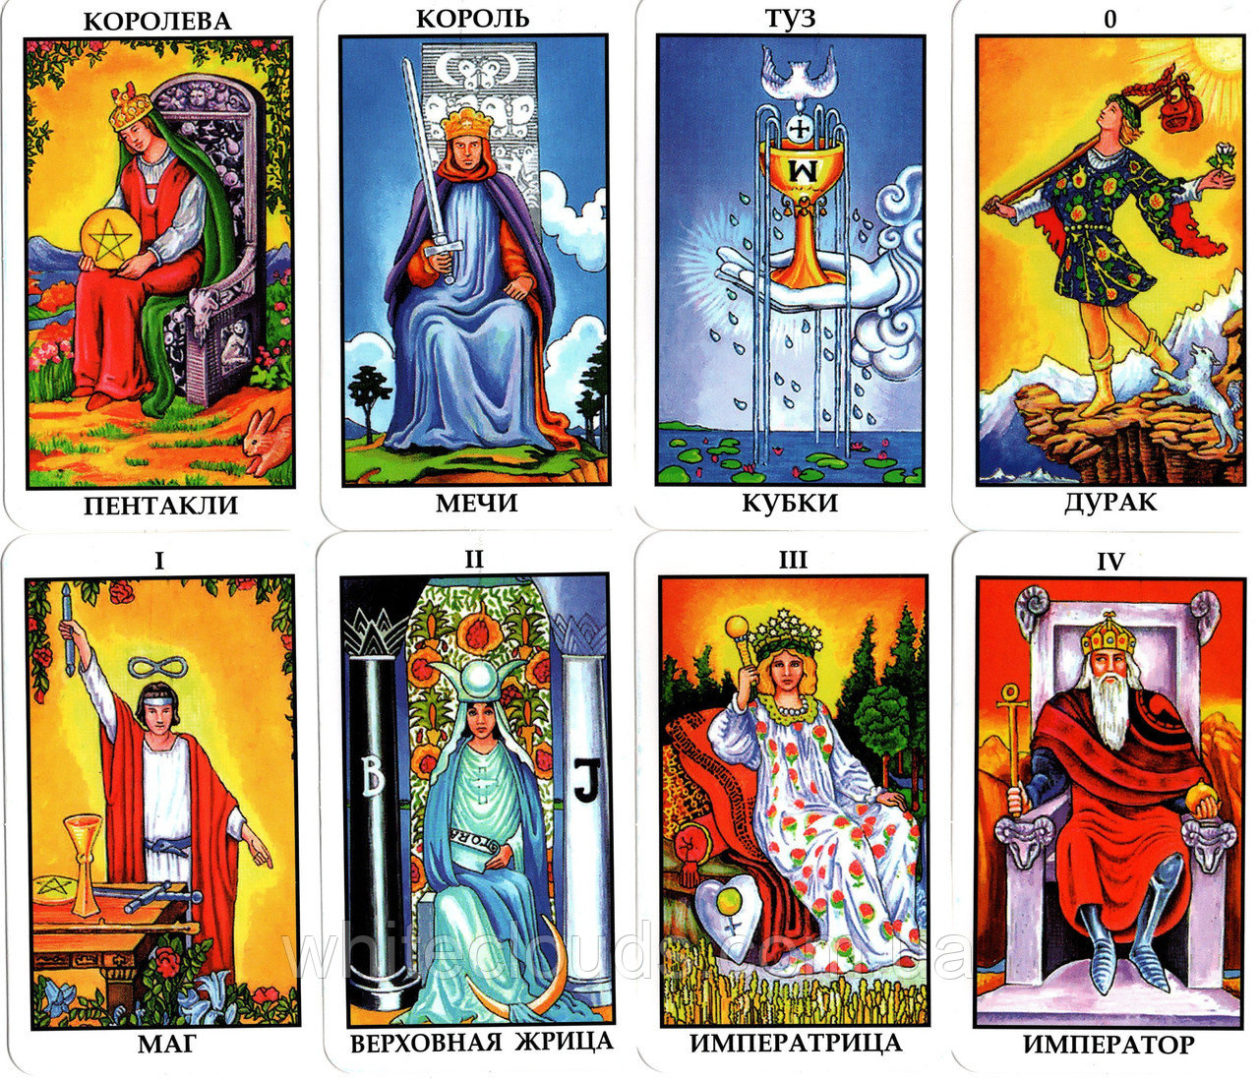 What is your tarot card for 2011?